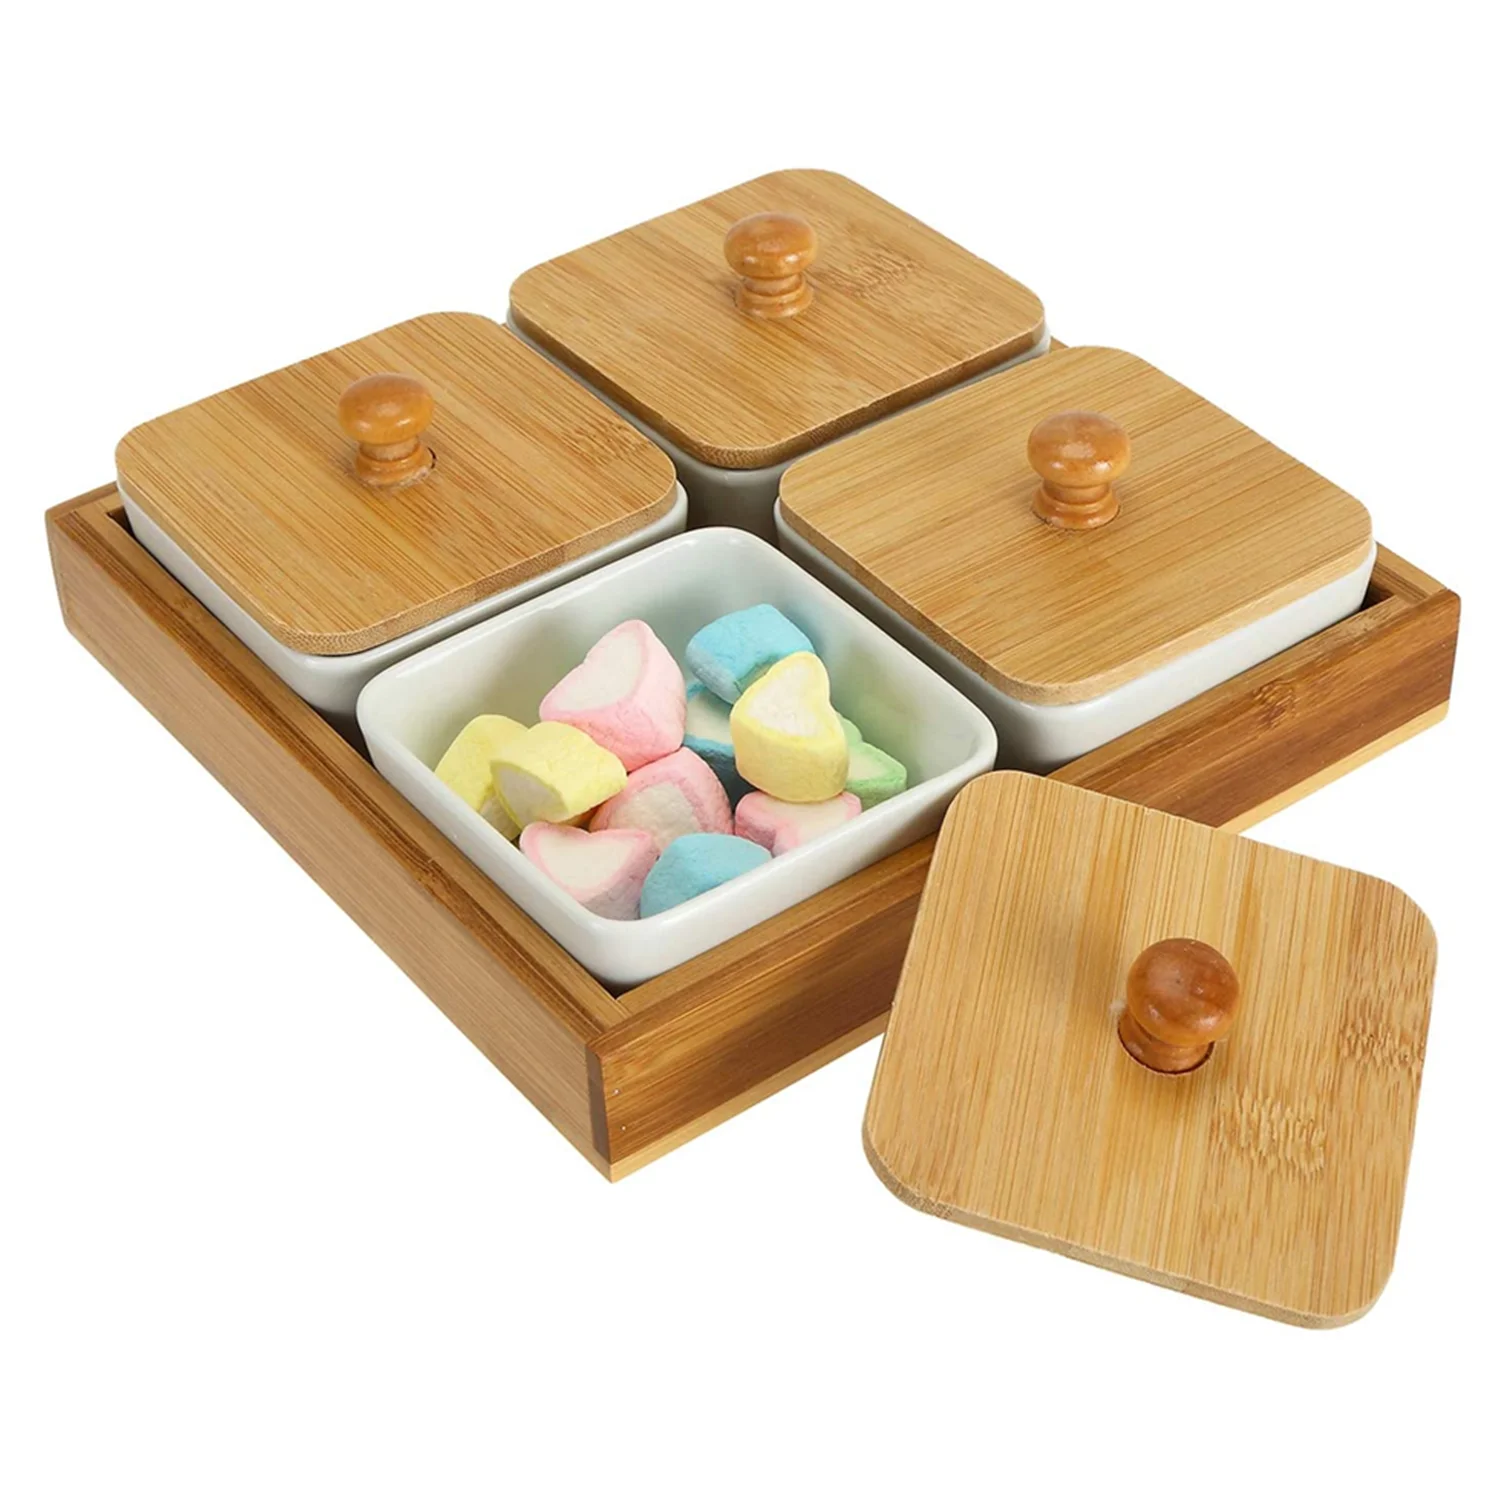 Fanwu Snack Serving Tray with Bamboo Lids and Pallets Removable Ceramic Compartment Bowls for Snacks,Condiments,Moisture-proof Bowls for Food,Appetizers 2-Compartment Serving Tray 